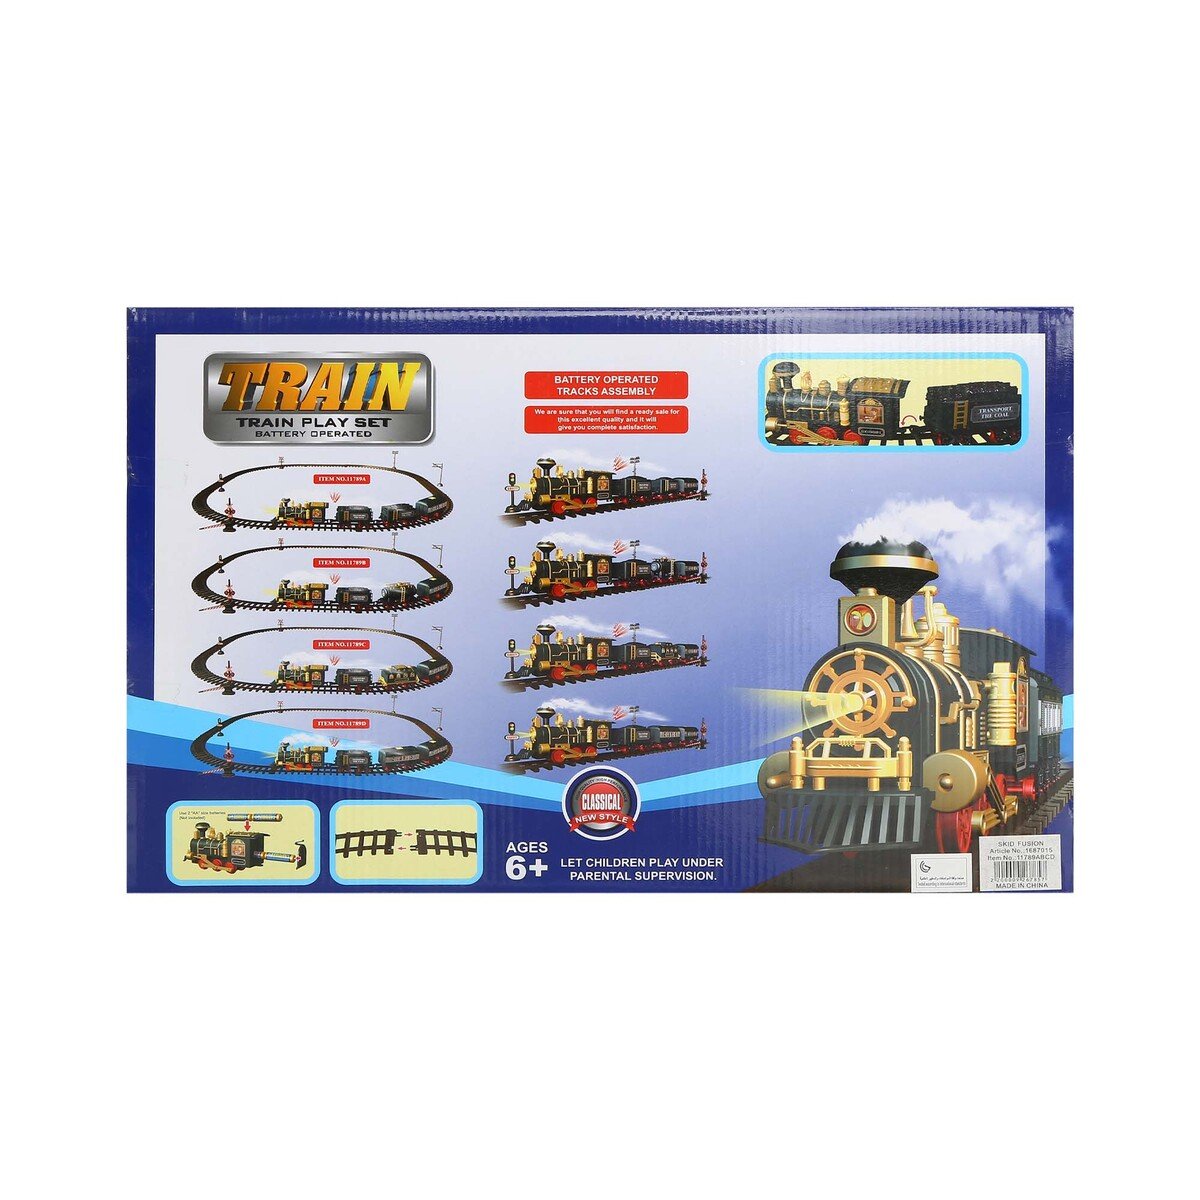 Skid Fusion Battery Opreted Train Play Set 188344-4W